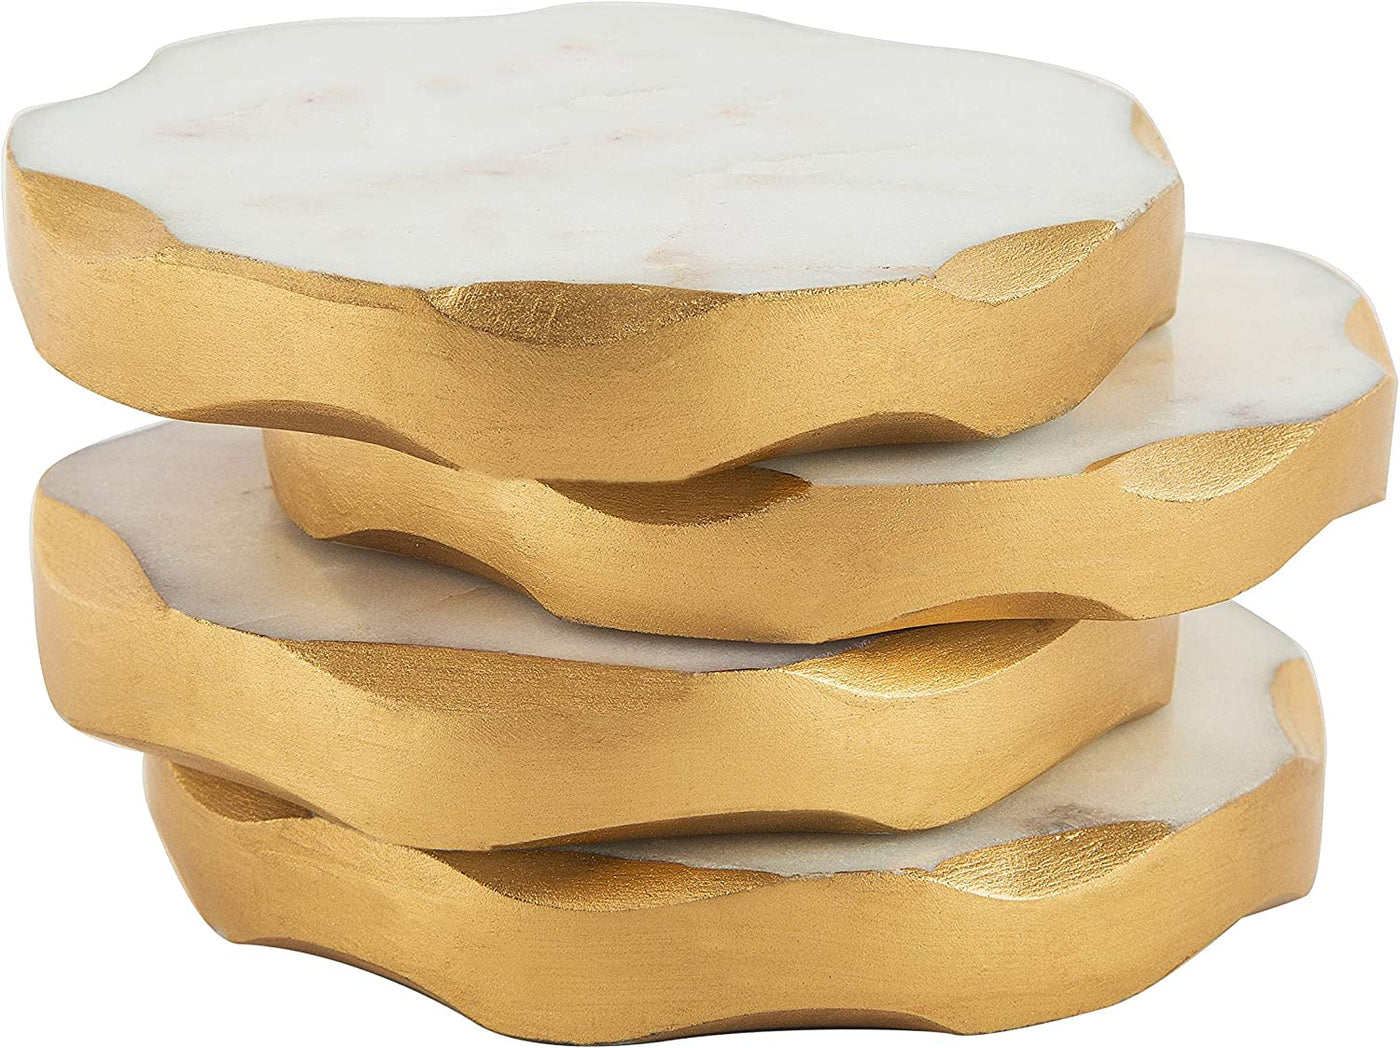 Marble Coasters - Set of 4 Round Natural Coasters with Gold Edges - Beautiful Gift